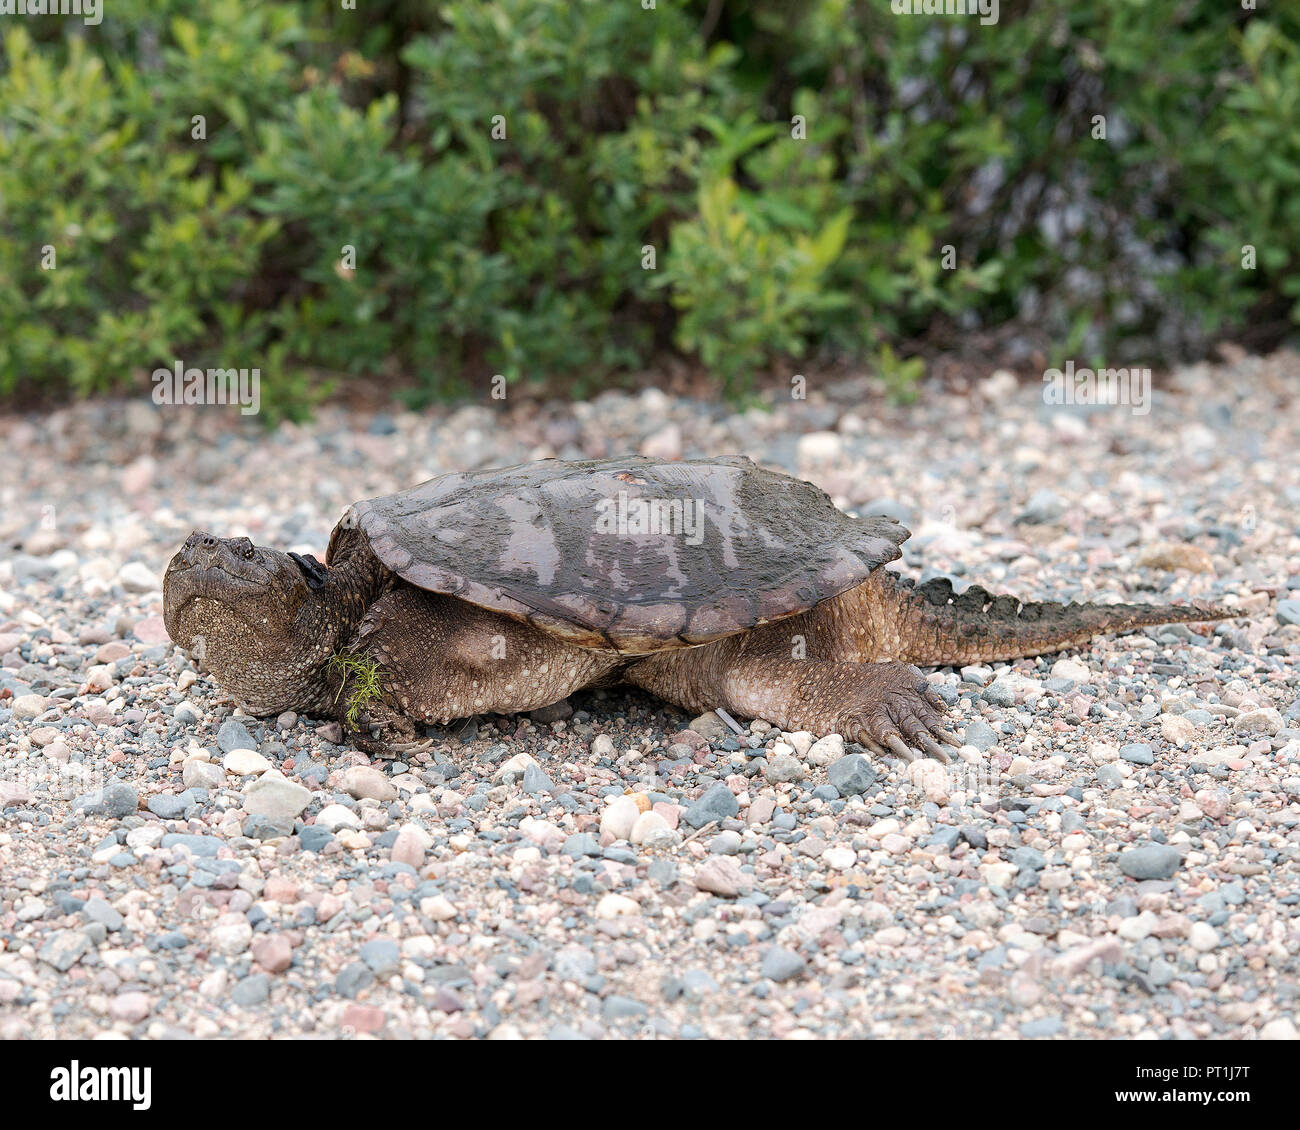 Snapping turtle in its environment. Stock Photo